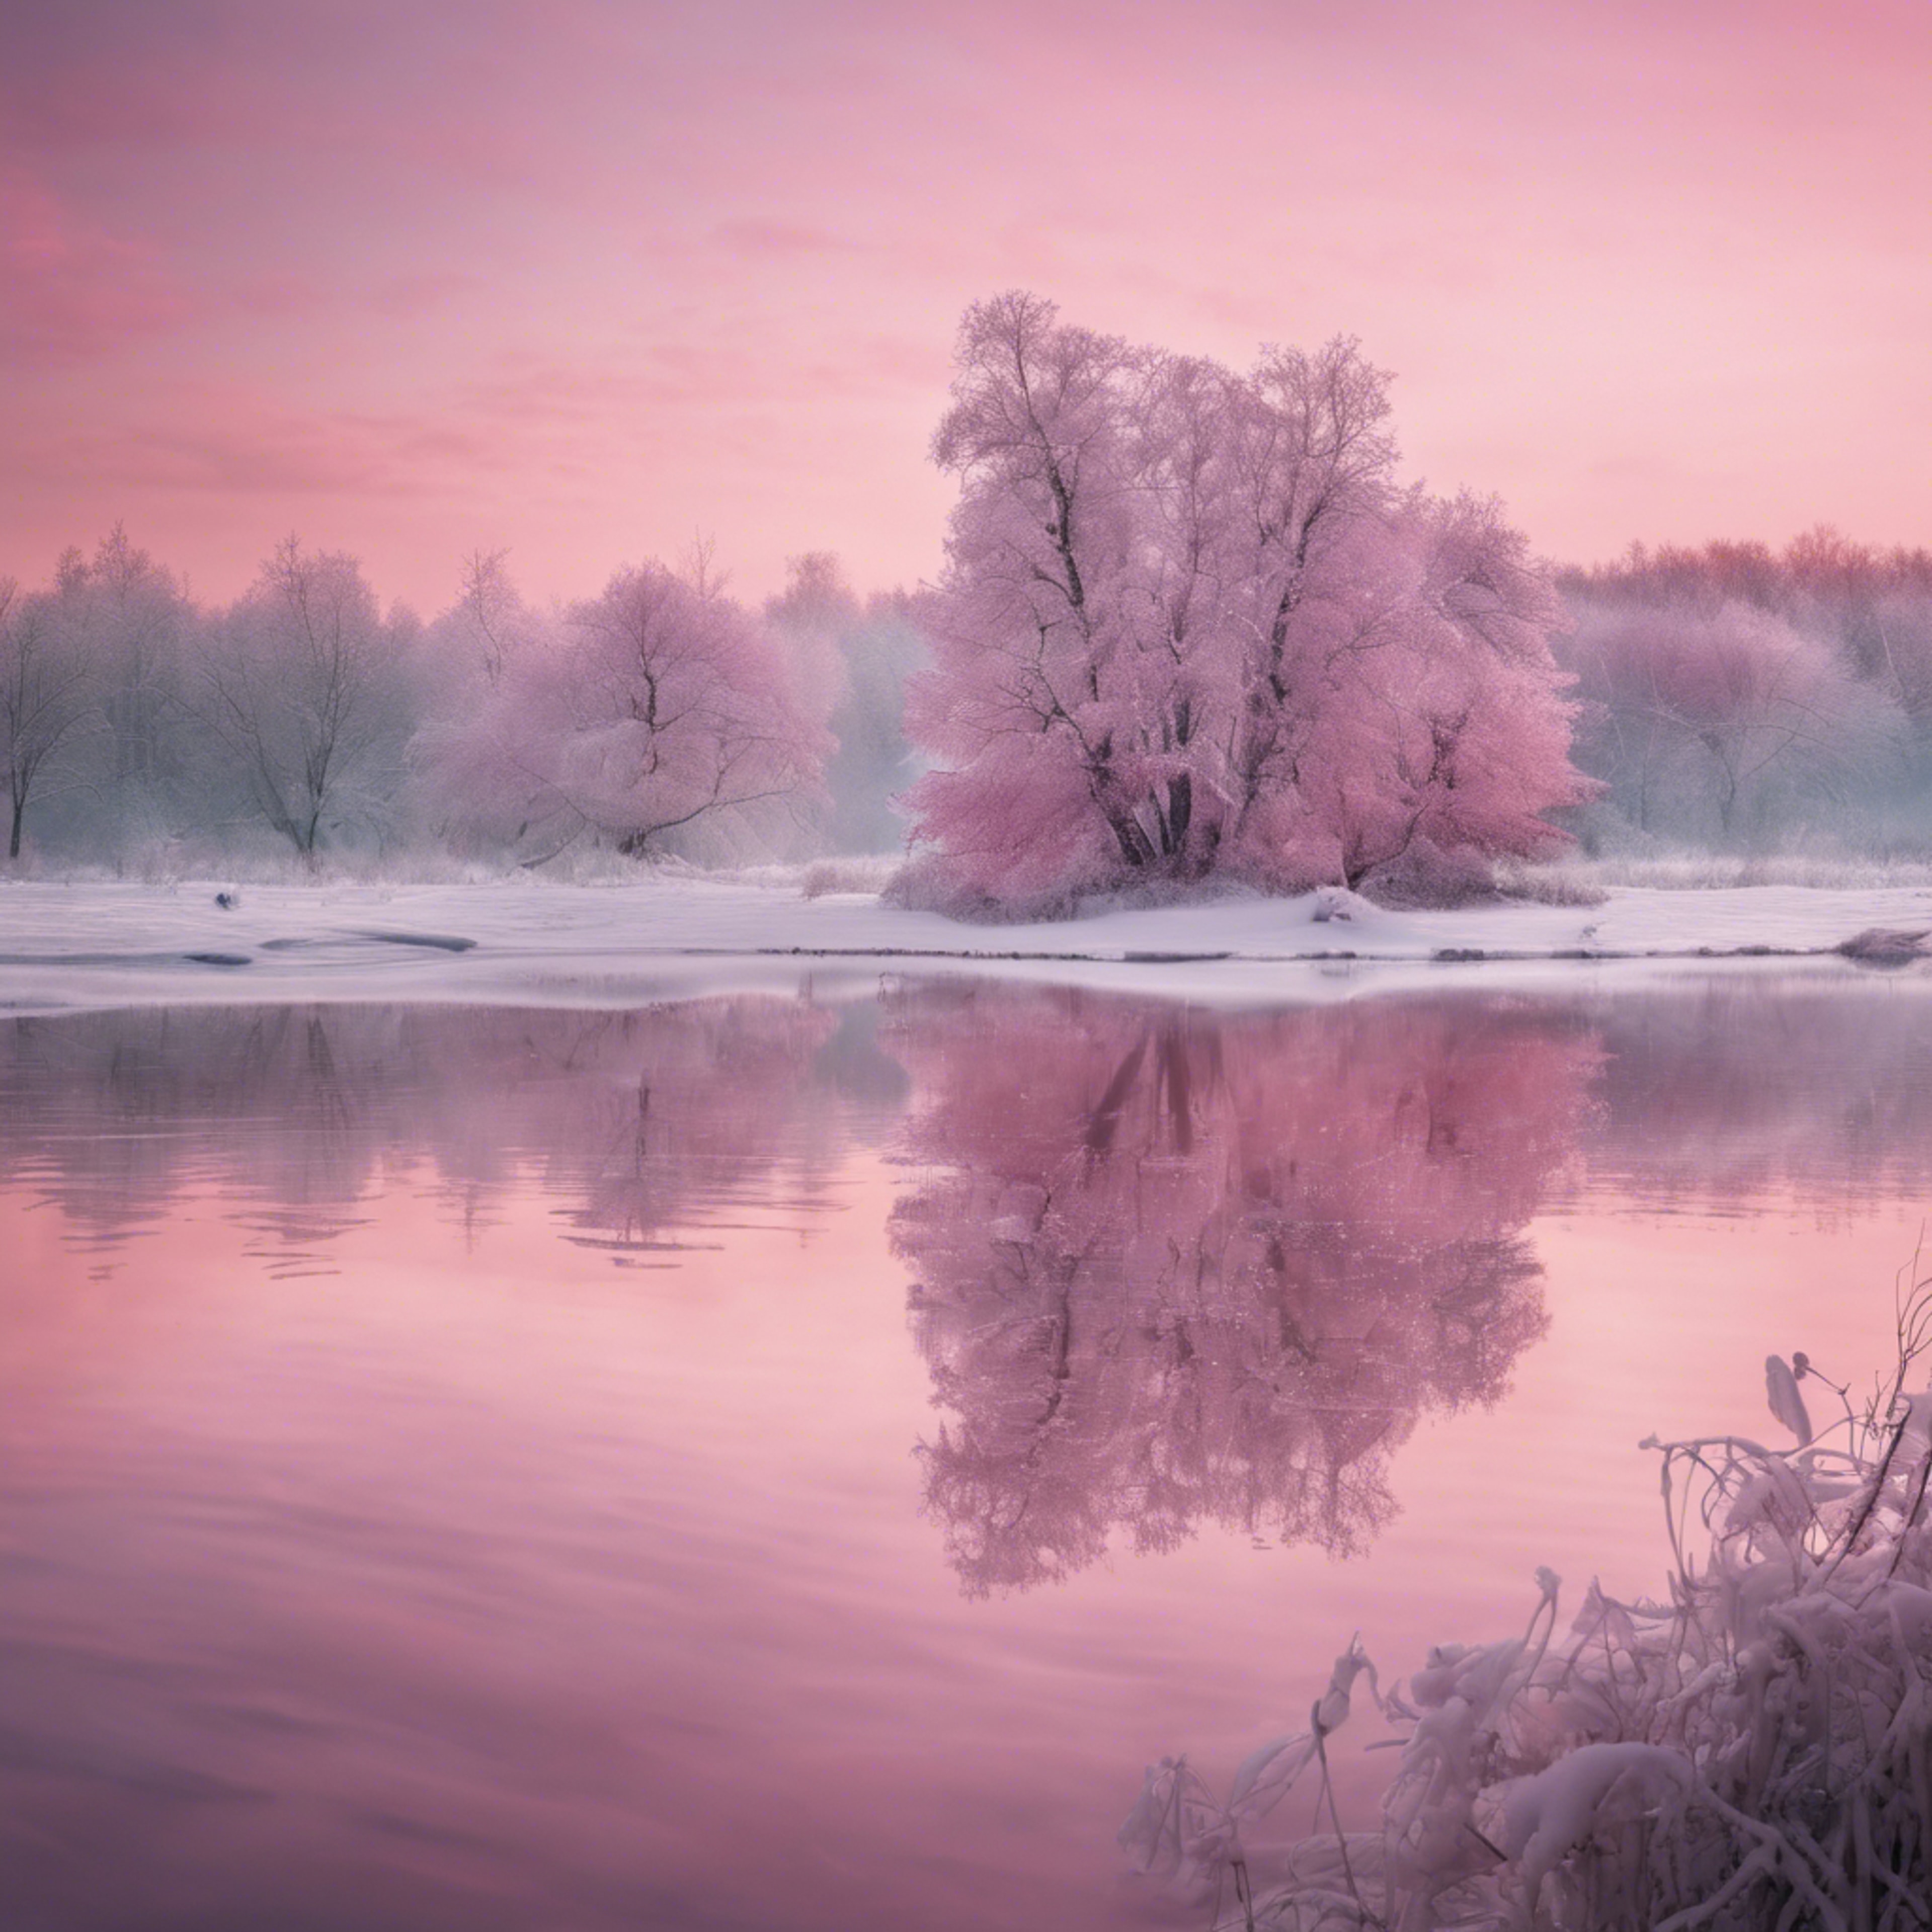 A tranquil pink Christmas morning landscape, reflections on a still frozen lake. Behang[99be3b4566ac4908b7ca]